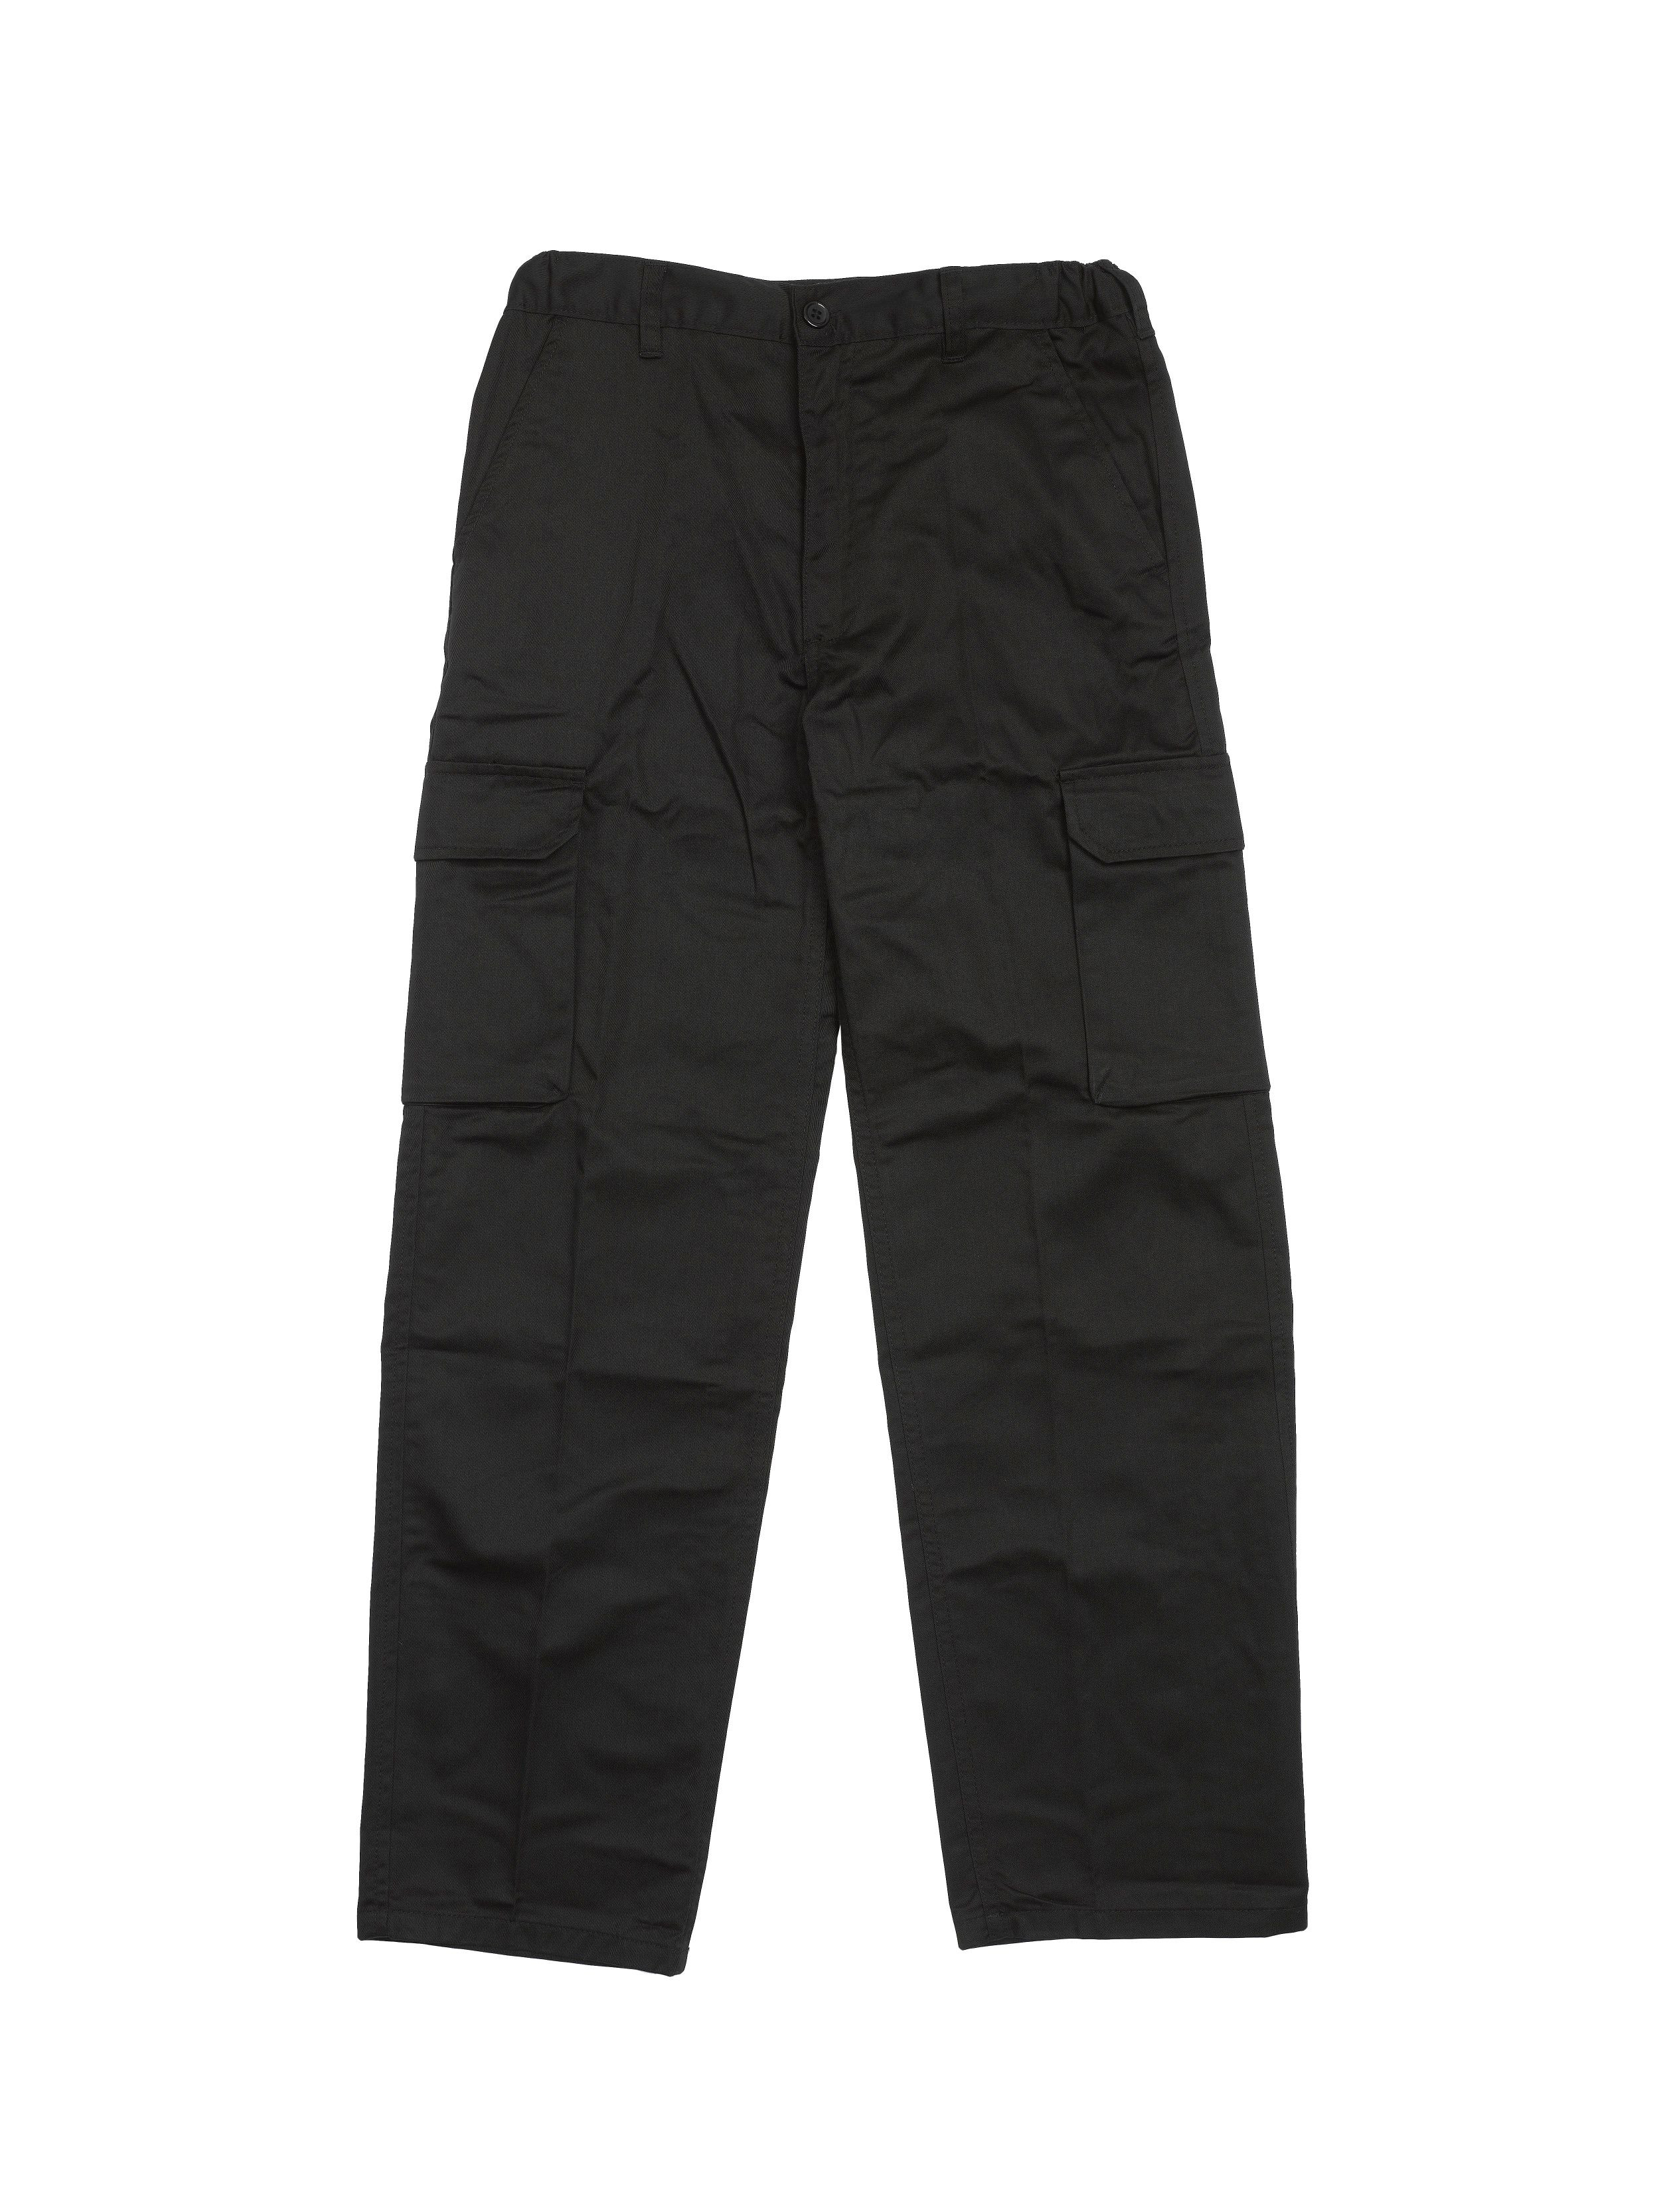 CARGO TROUSER | Warrior Protects